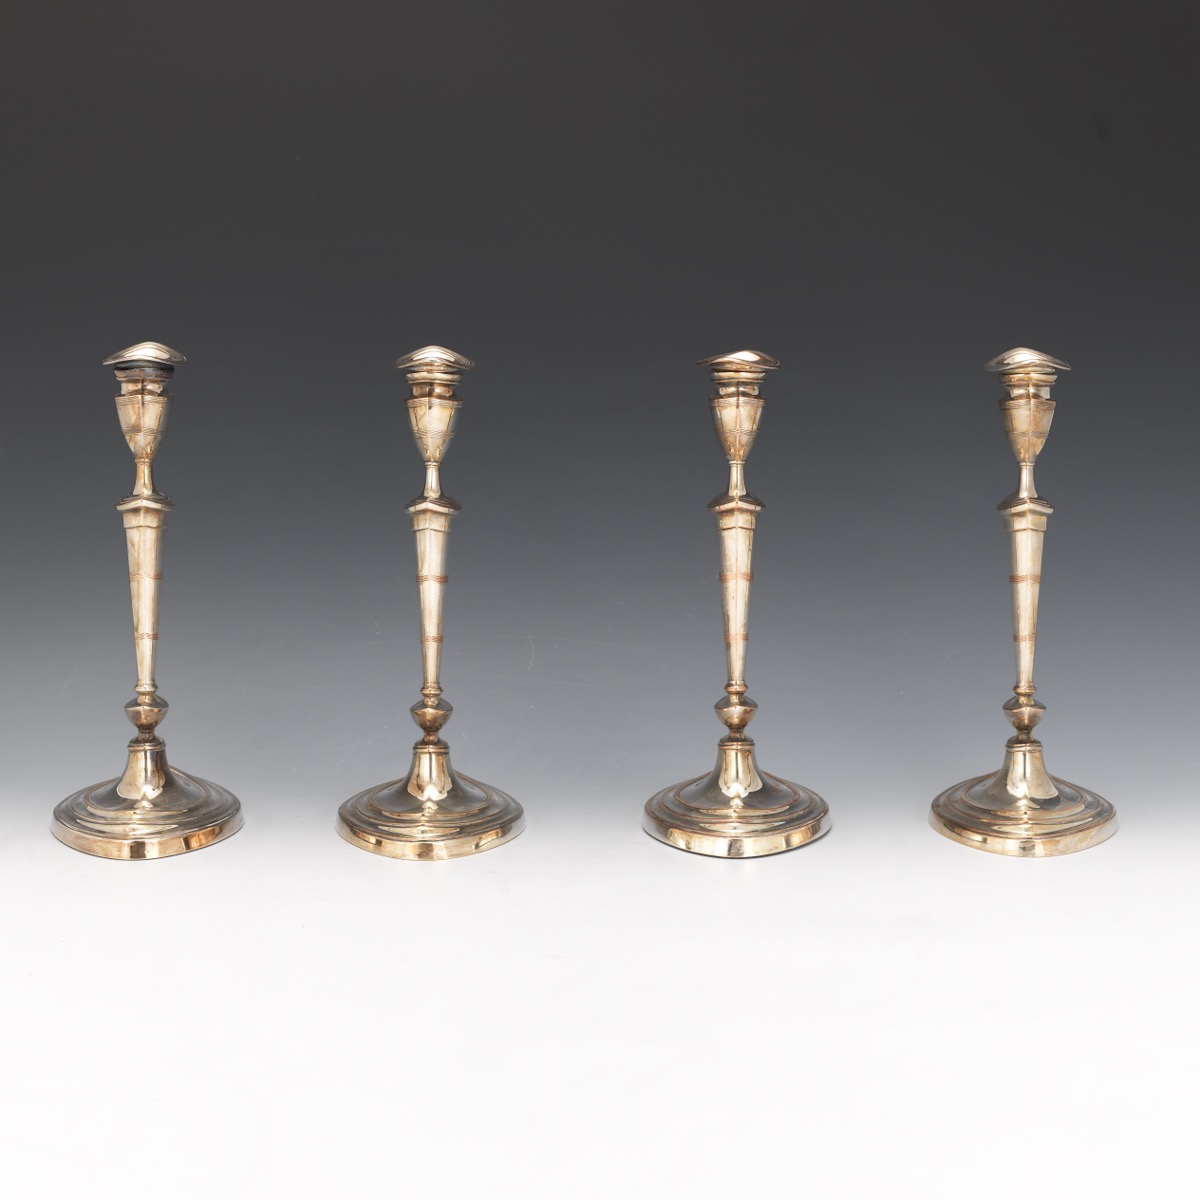 Four Silver Plated Mixed Metals Candleholders, by Ellis-Barker Silver Co., Birmingham, England - Image 4 of 6